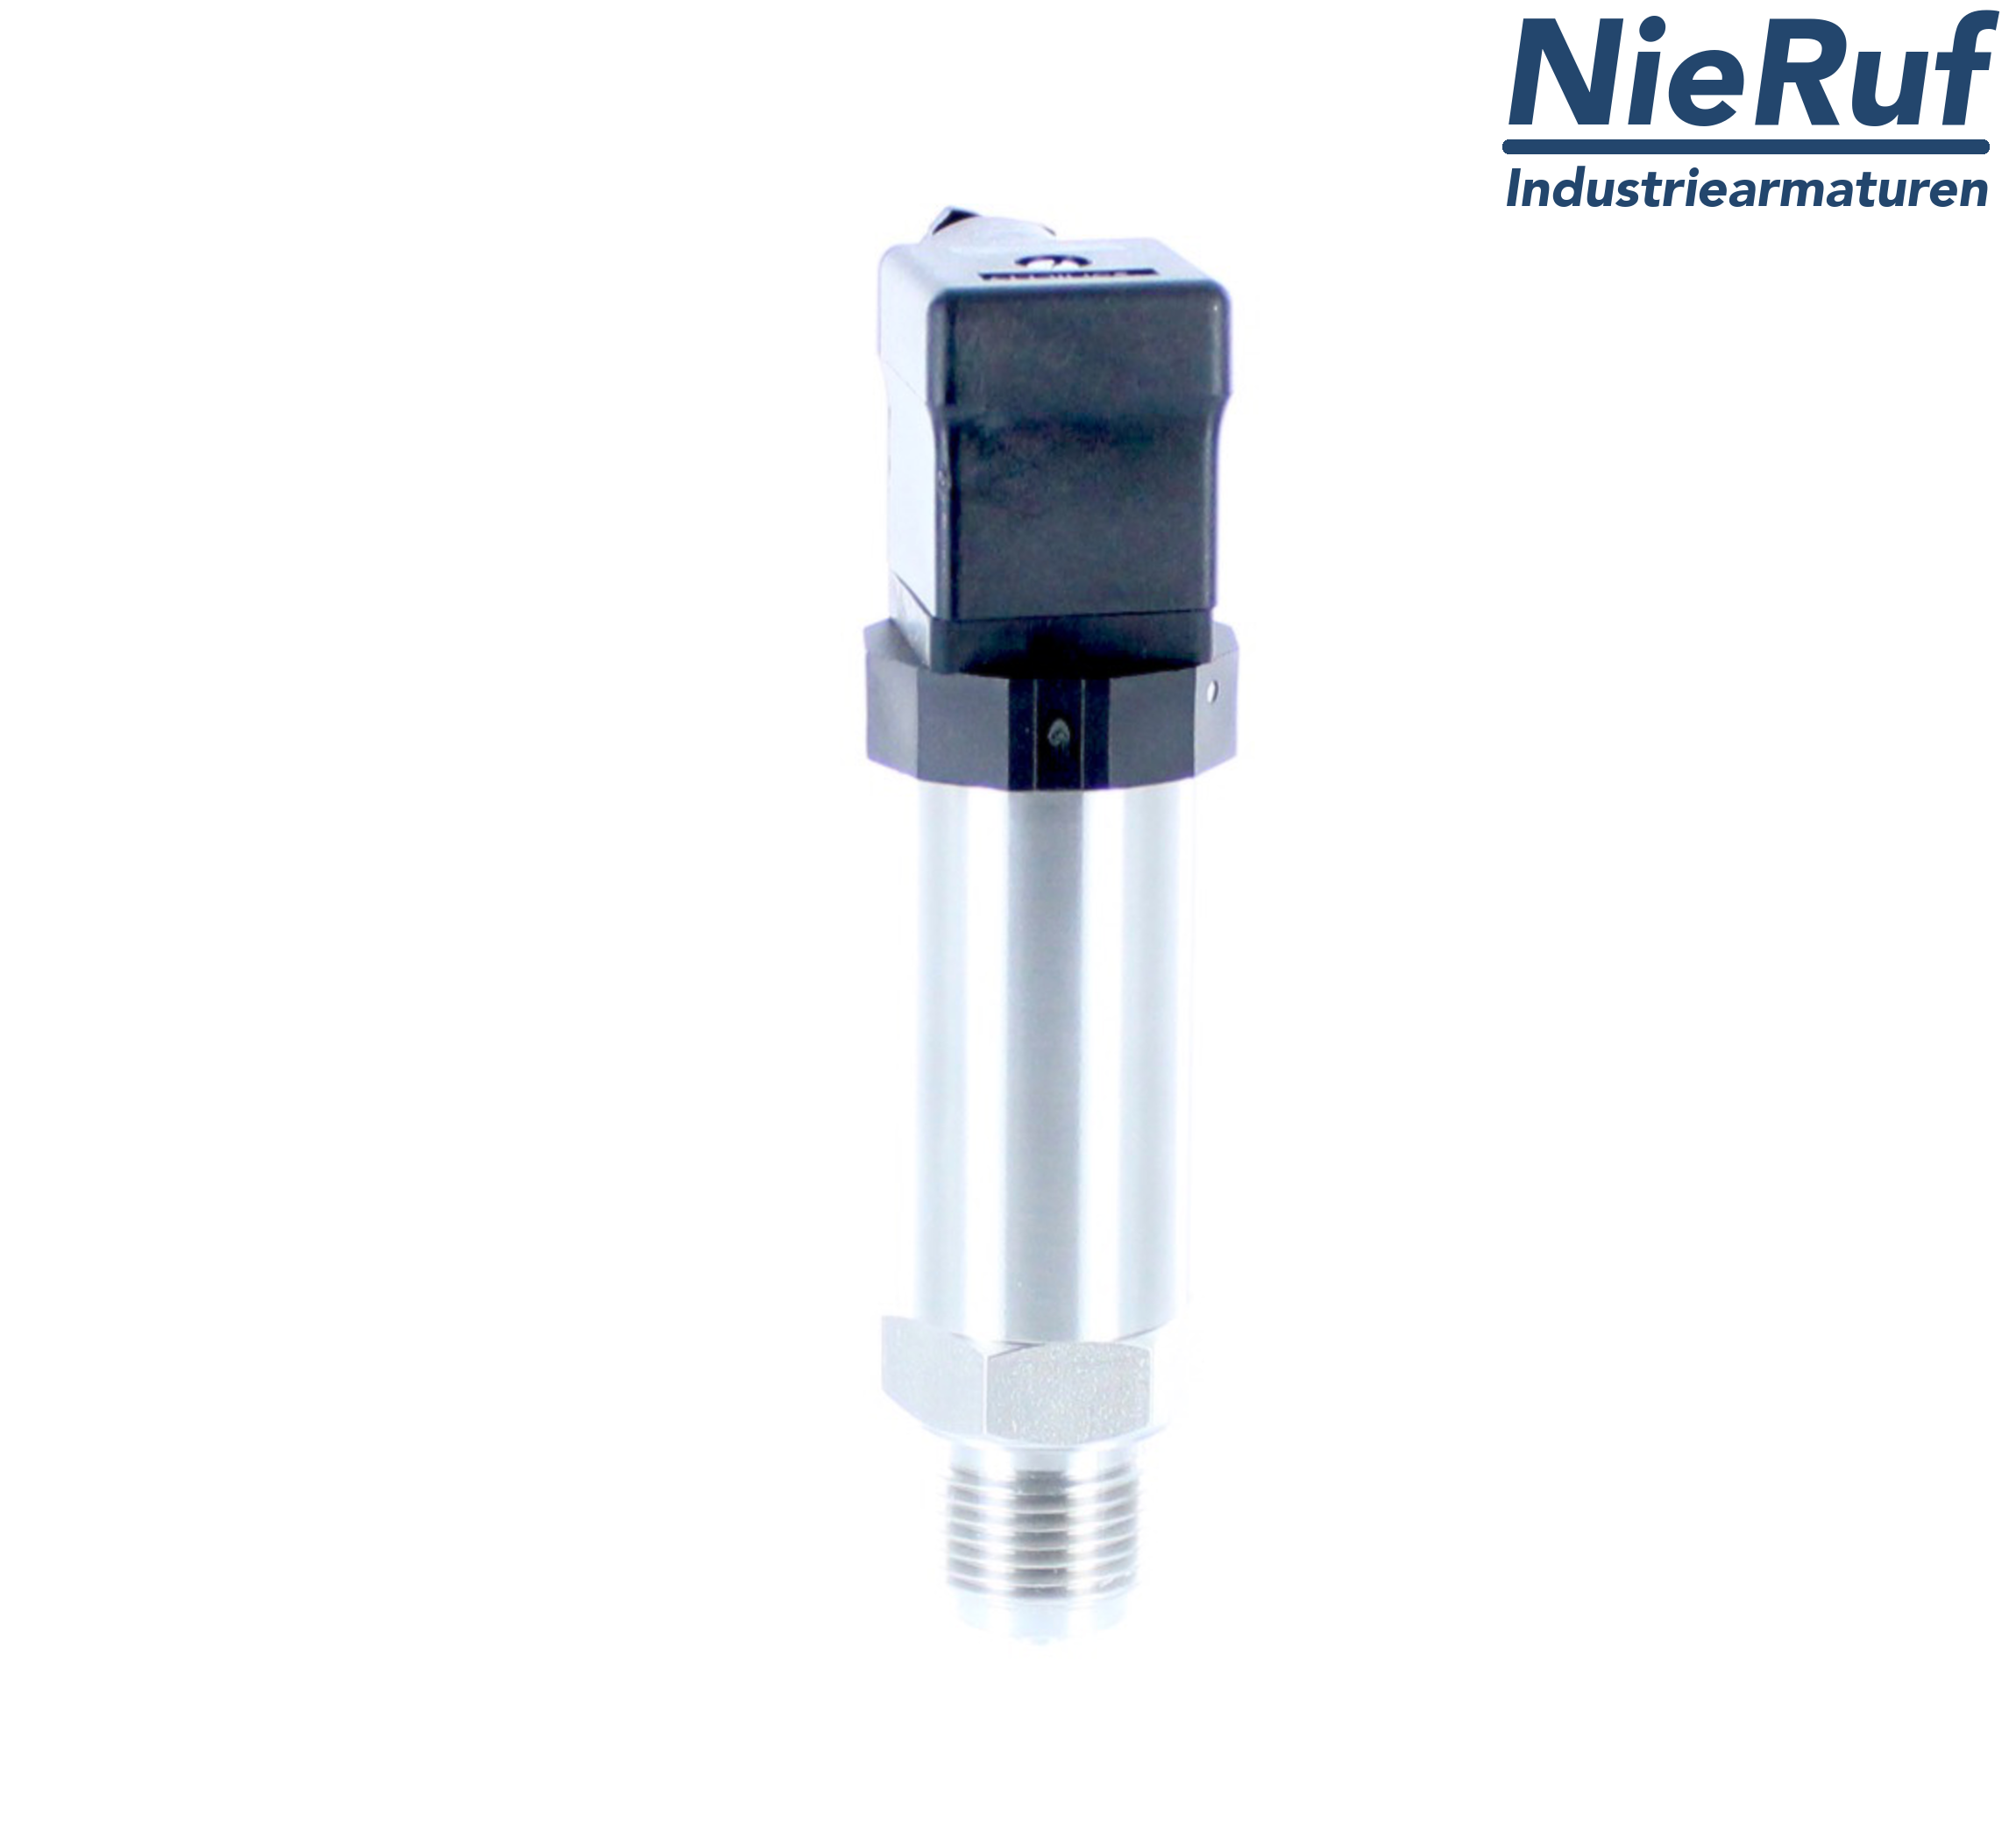 pressure sensor G 1/2" B DS01 stainless steel 2-wire: 4-20mA FPM 0,0 - 400,0 bar